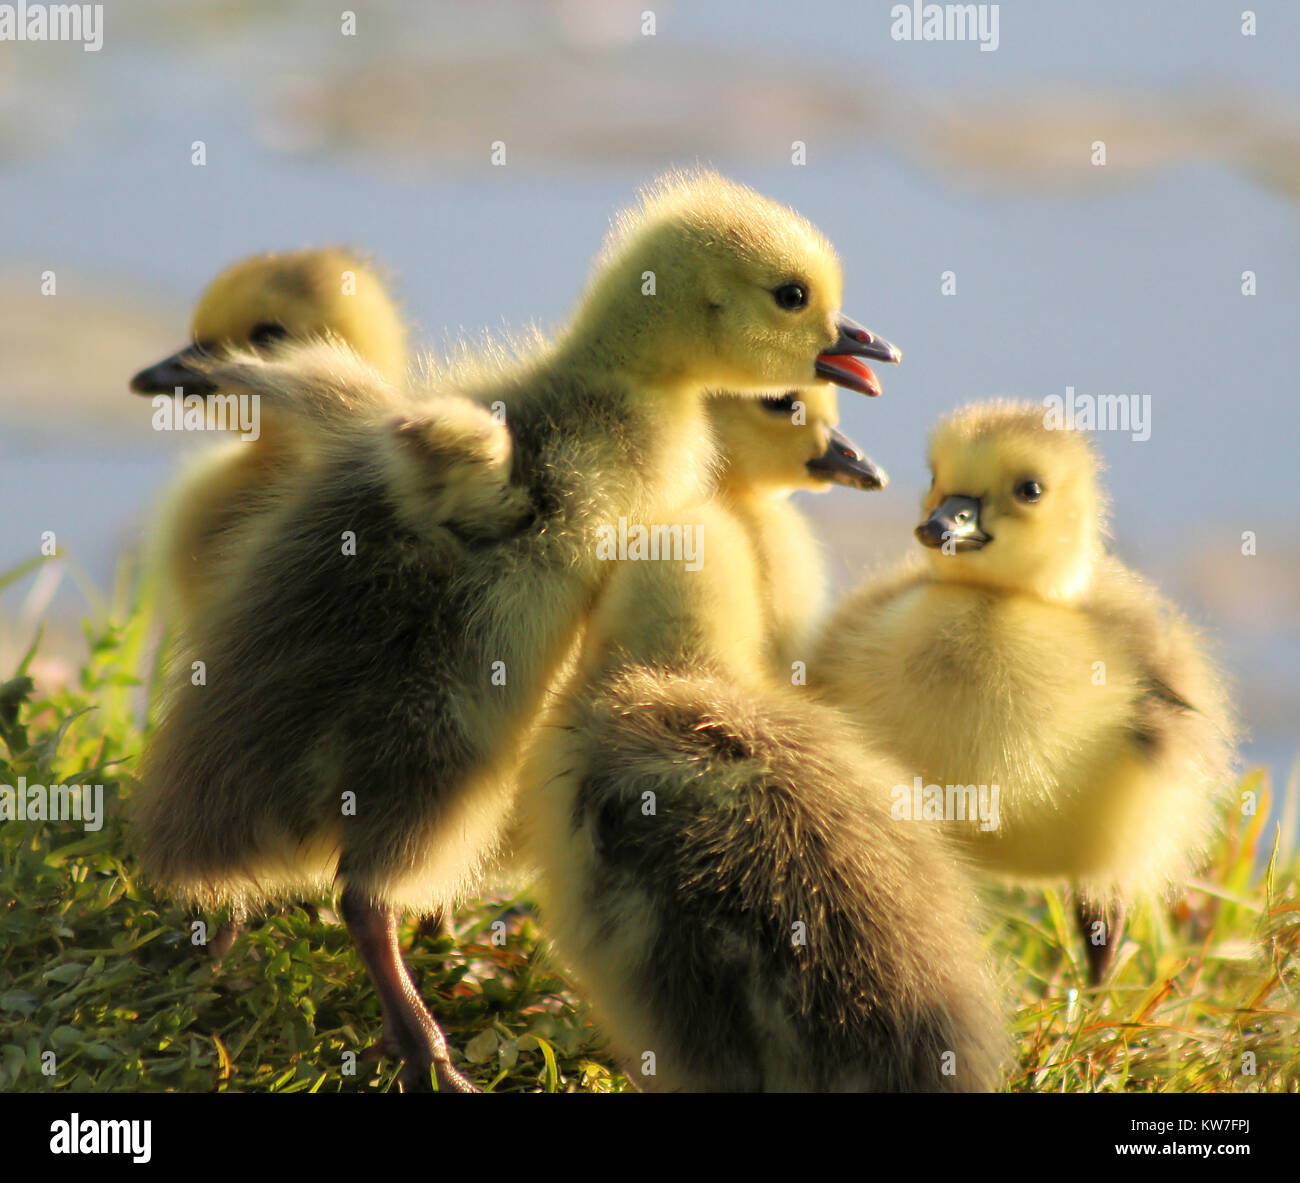 The Storyteller - young goslings newly hatched together in a group on land. Stock Photo